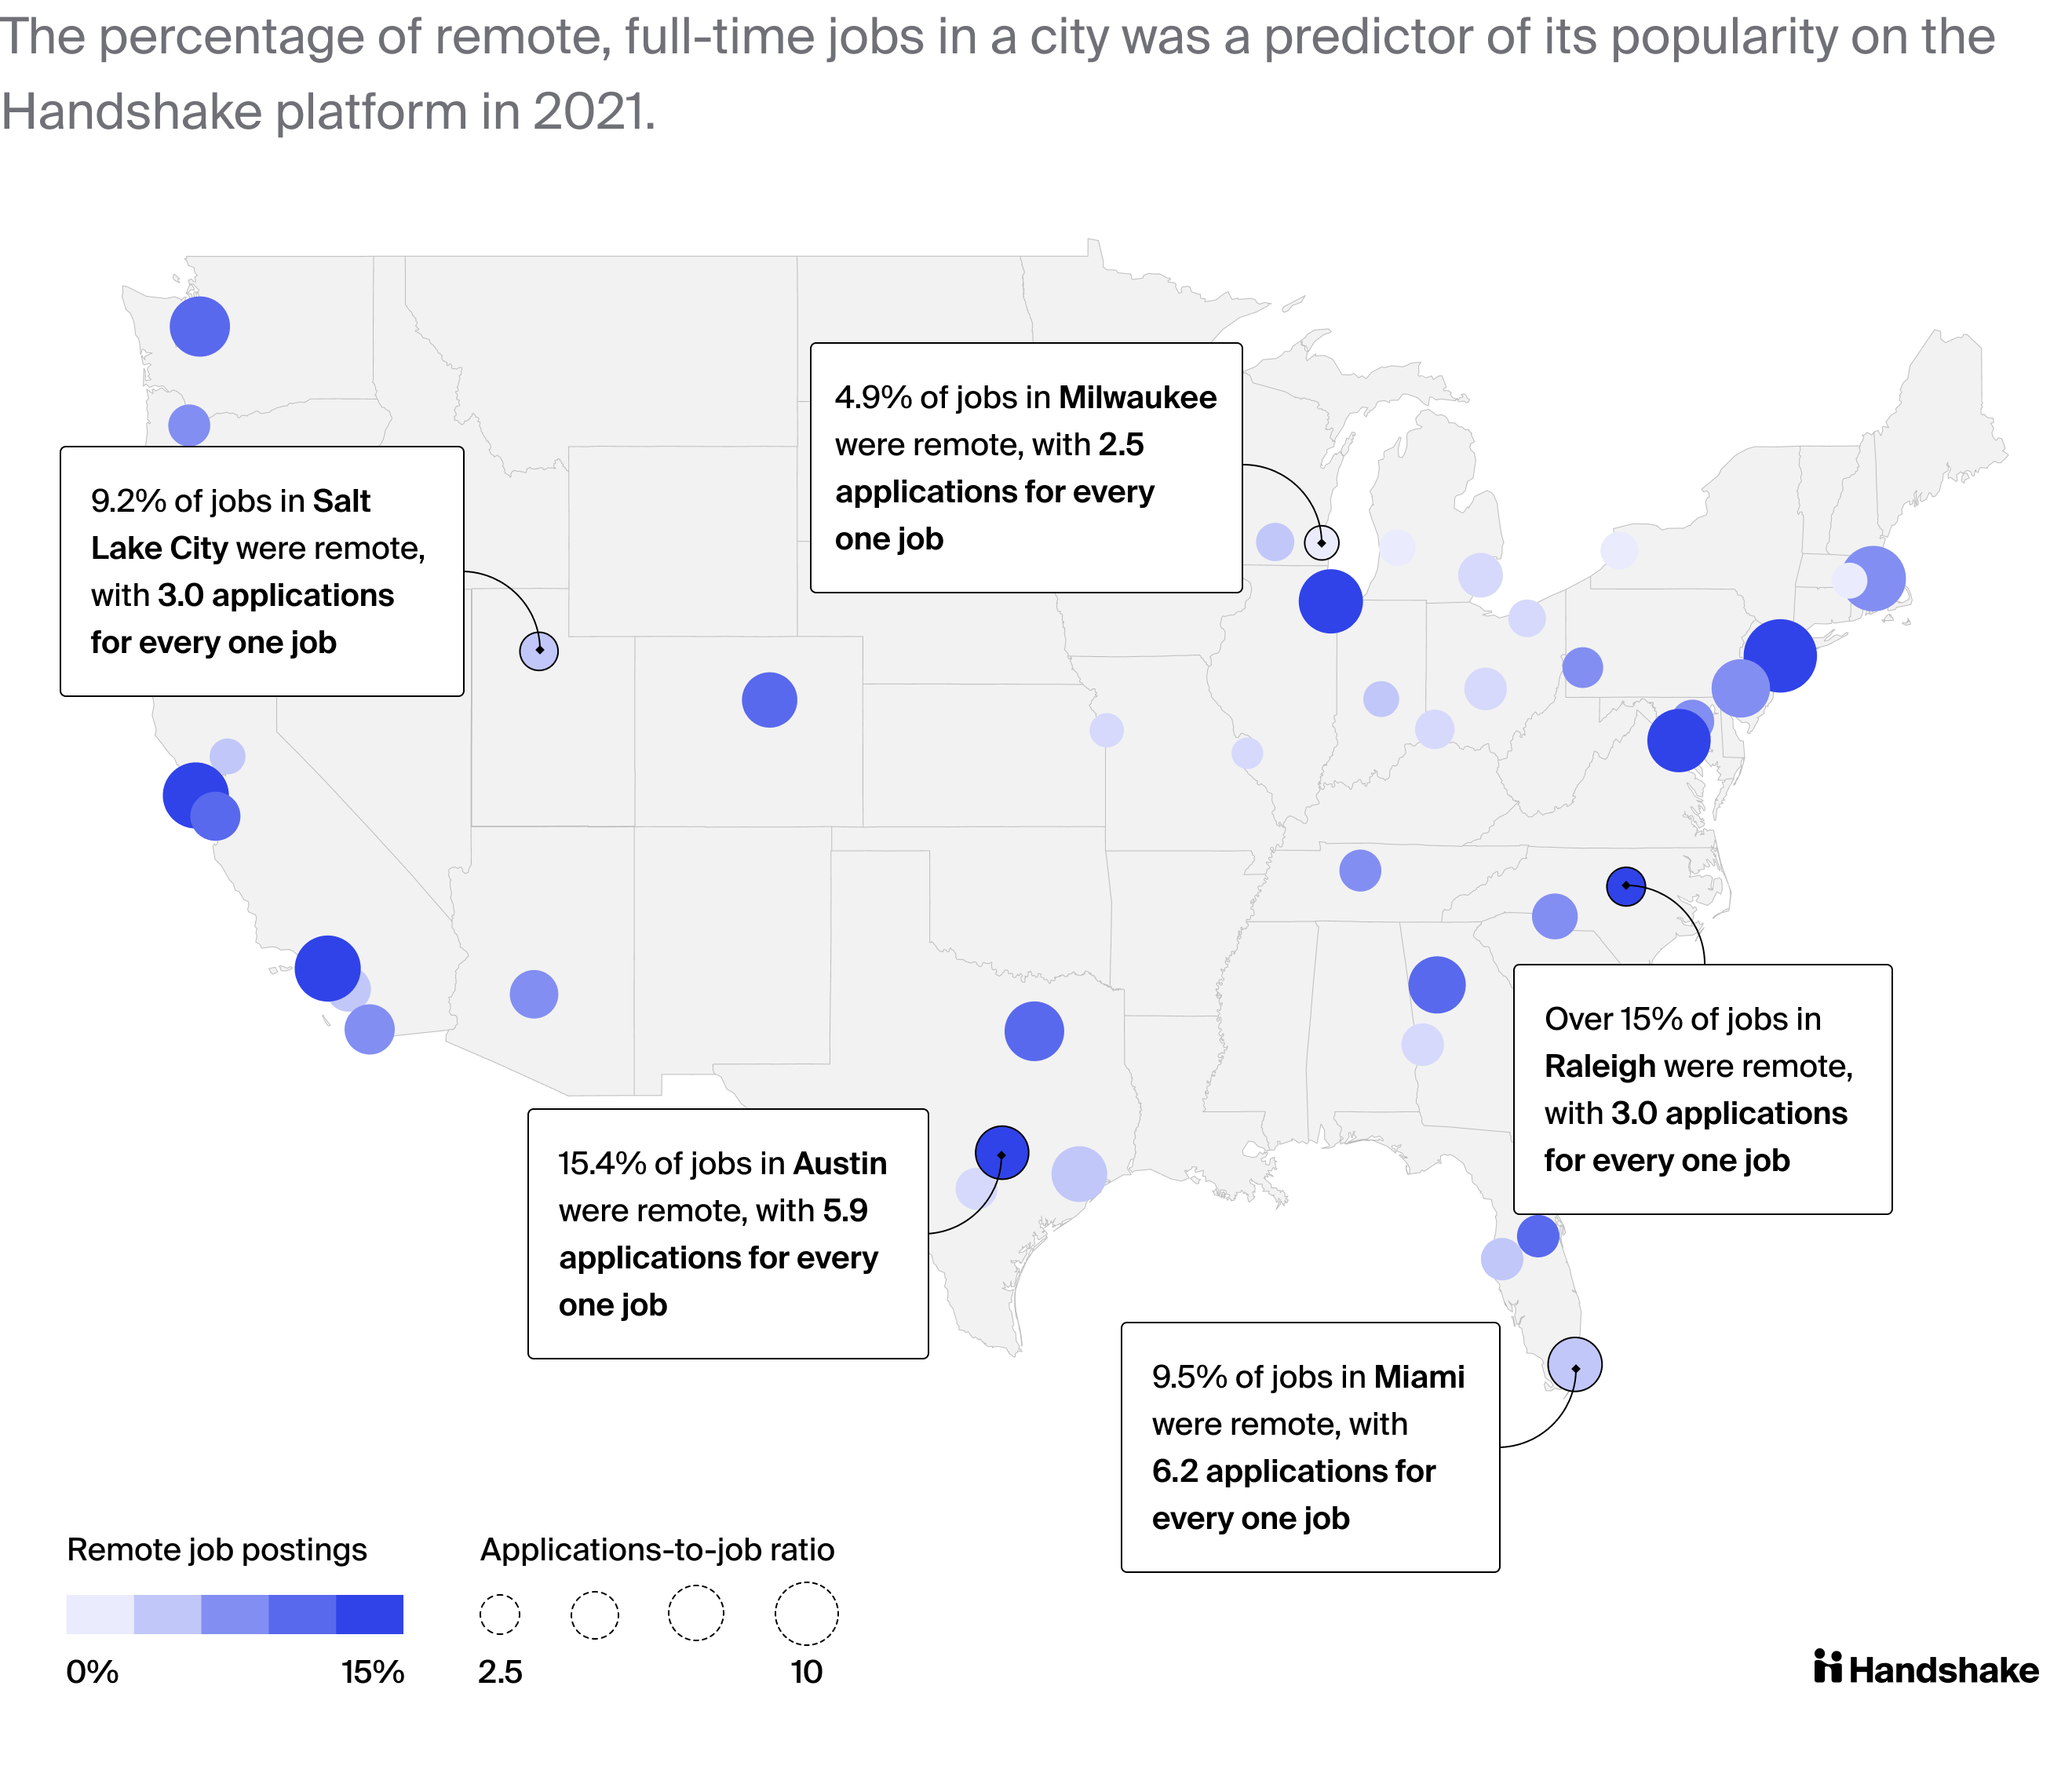 The percentage of remote, full-time jobs in a city was a predictor of its popularity on the Handshake platform in 2021. Map of the United States showing the percentage of remote job postings and the application to job ratio in each city. Cities are called out as an example: 9.5% of jobs in Miami were remote with 6.2 applications for every one job compared to Raleigh, where over 15% of jobs were remote and 3.0 applications for every one job